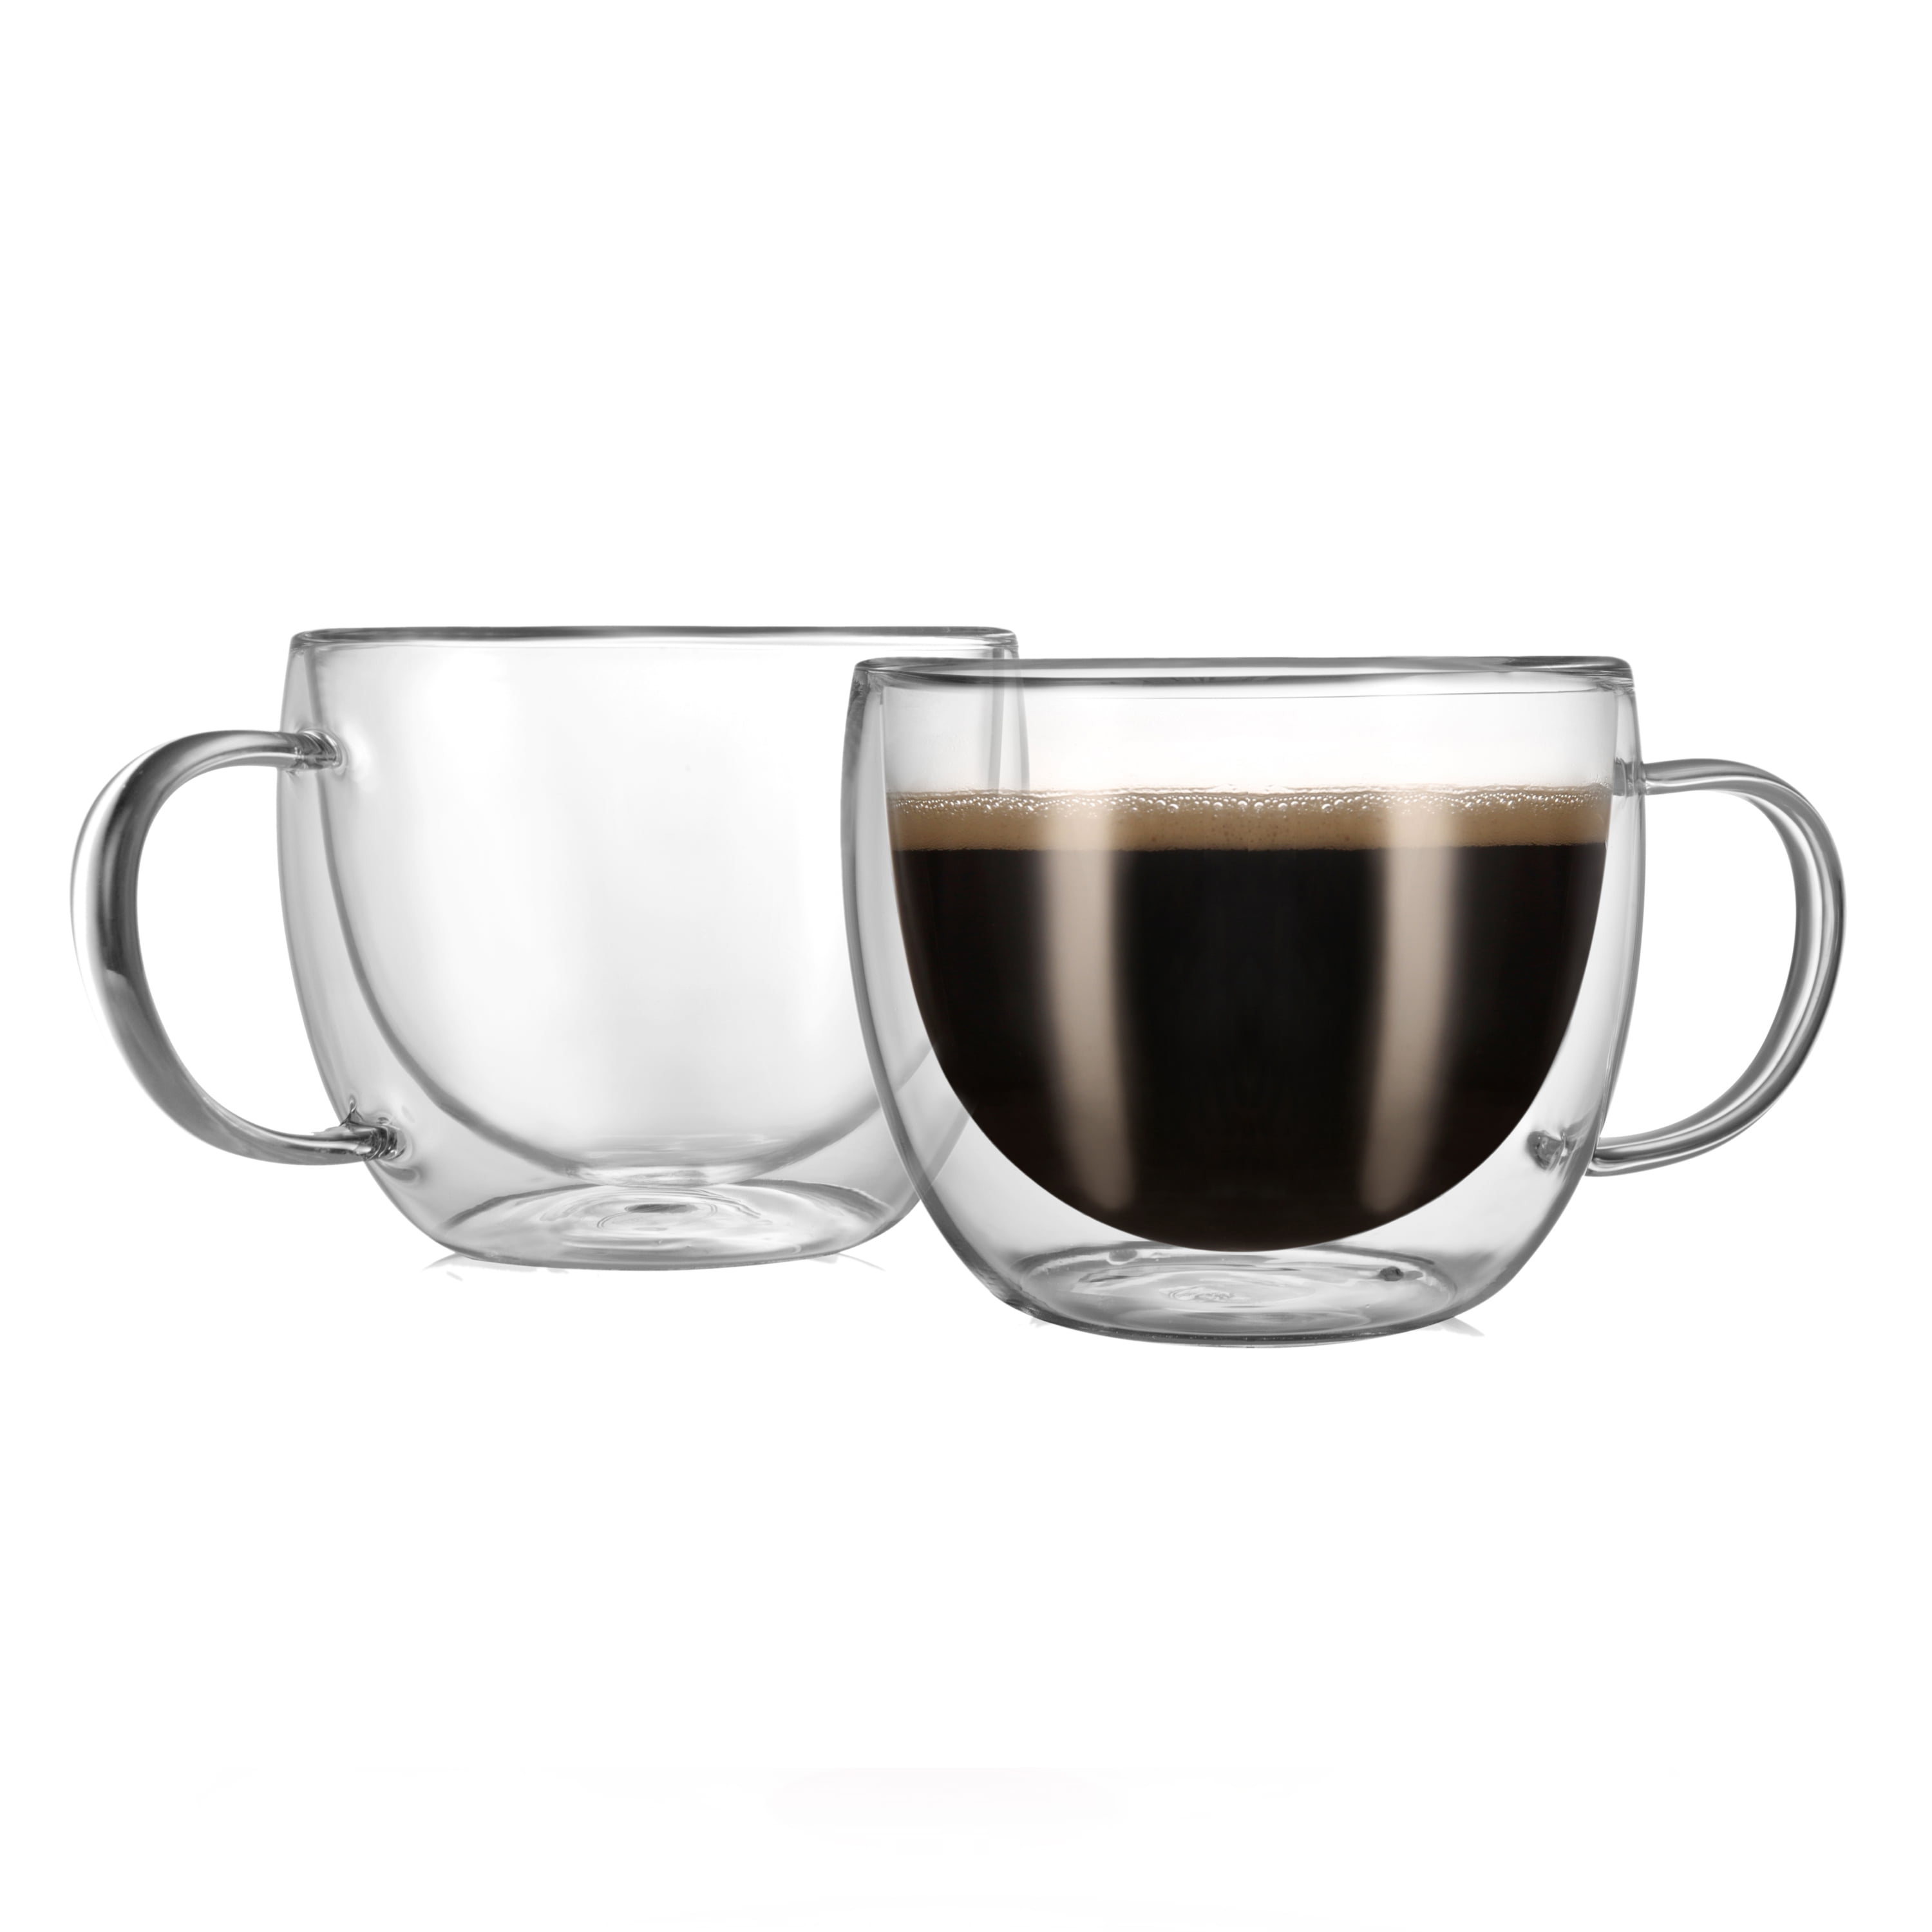 Coffee Mug. Coffe Cups Glass Set of 2. Clear Glass Coffee Cups 6.8 Oz with  Handles & Spoon for Hot and Cold Beverages - Cappuccino, Latte, Tea Cup.